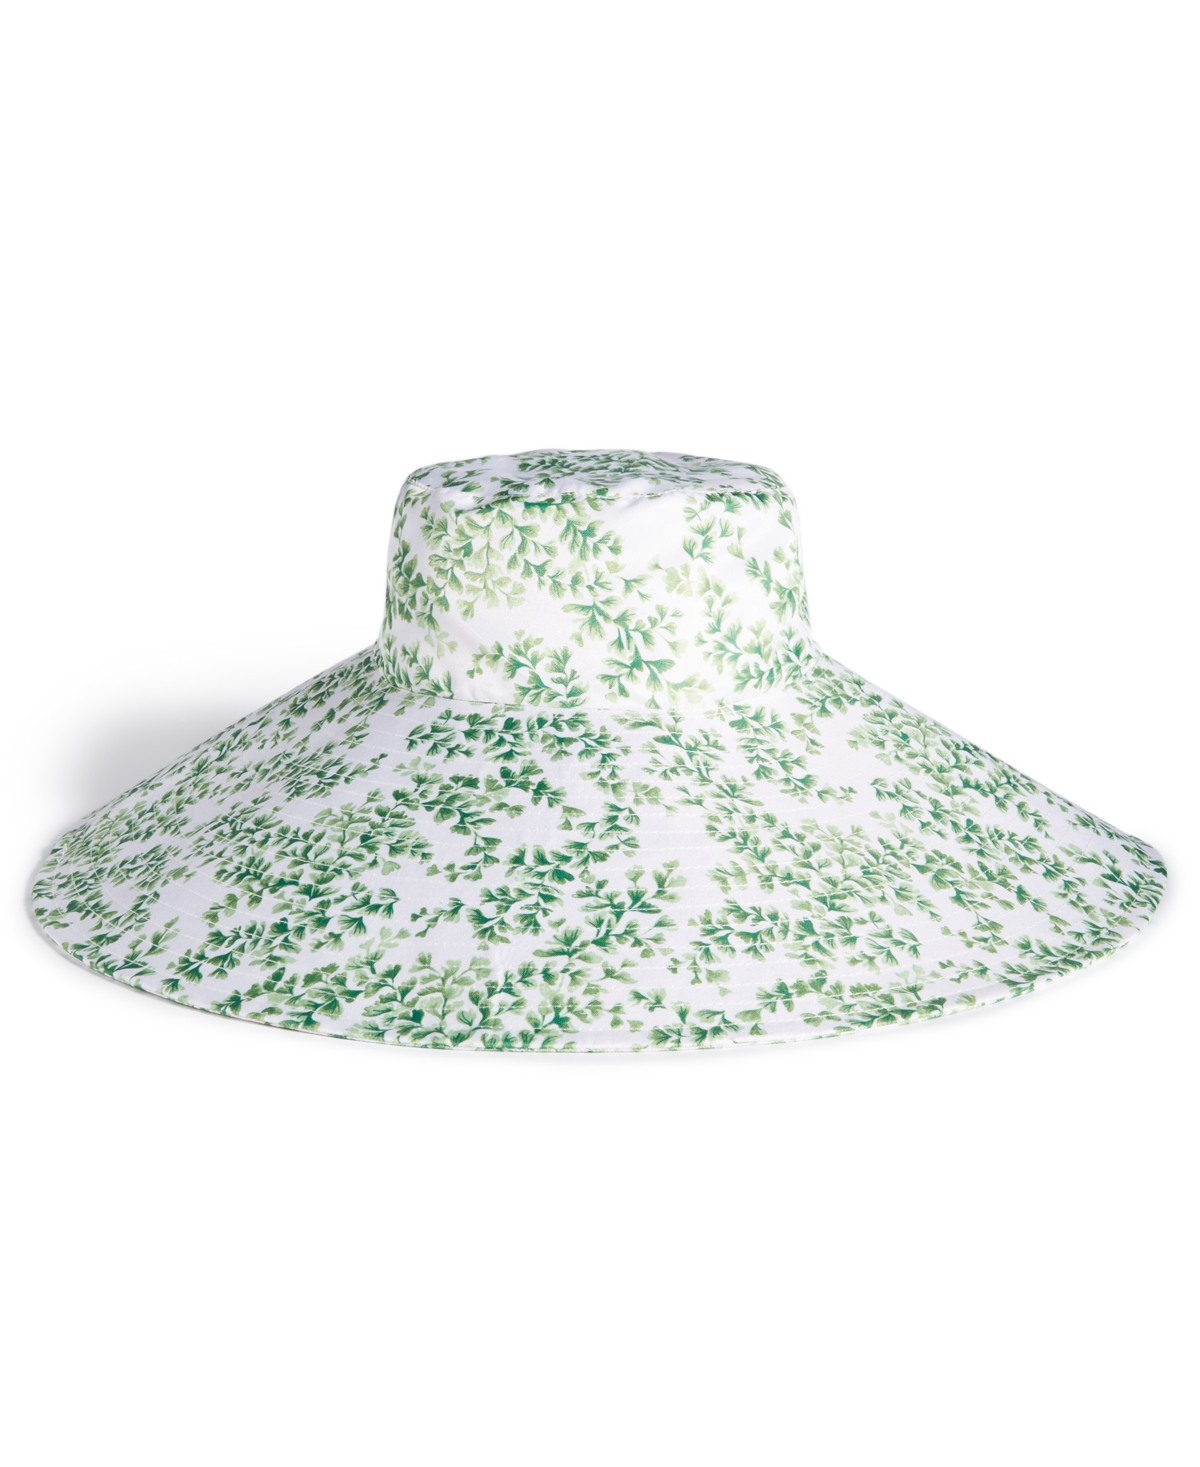 Flower Show Wide Brim Hat, Created for Macy's - Green Leaf